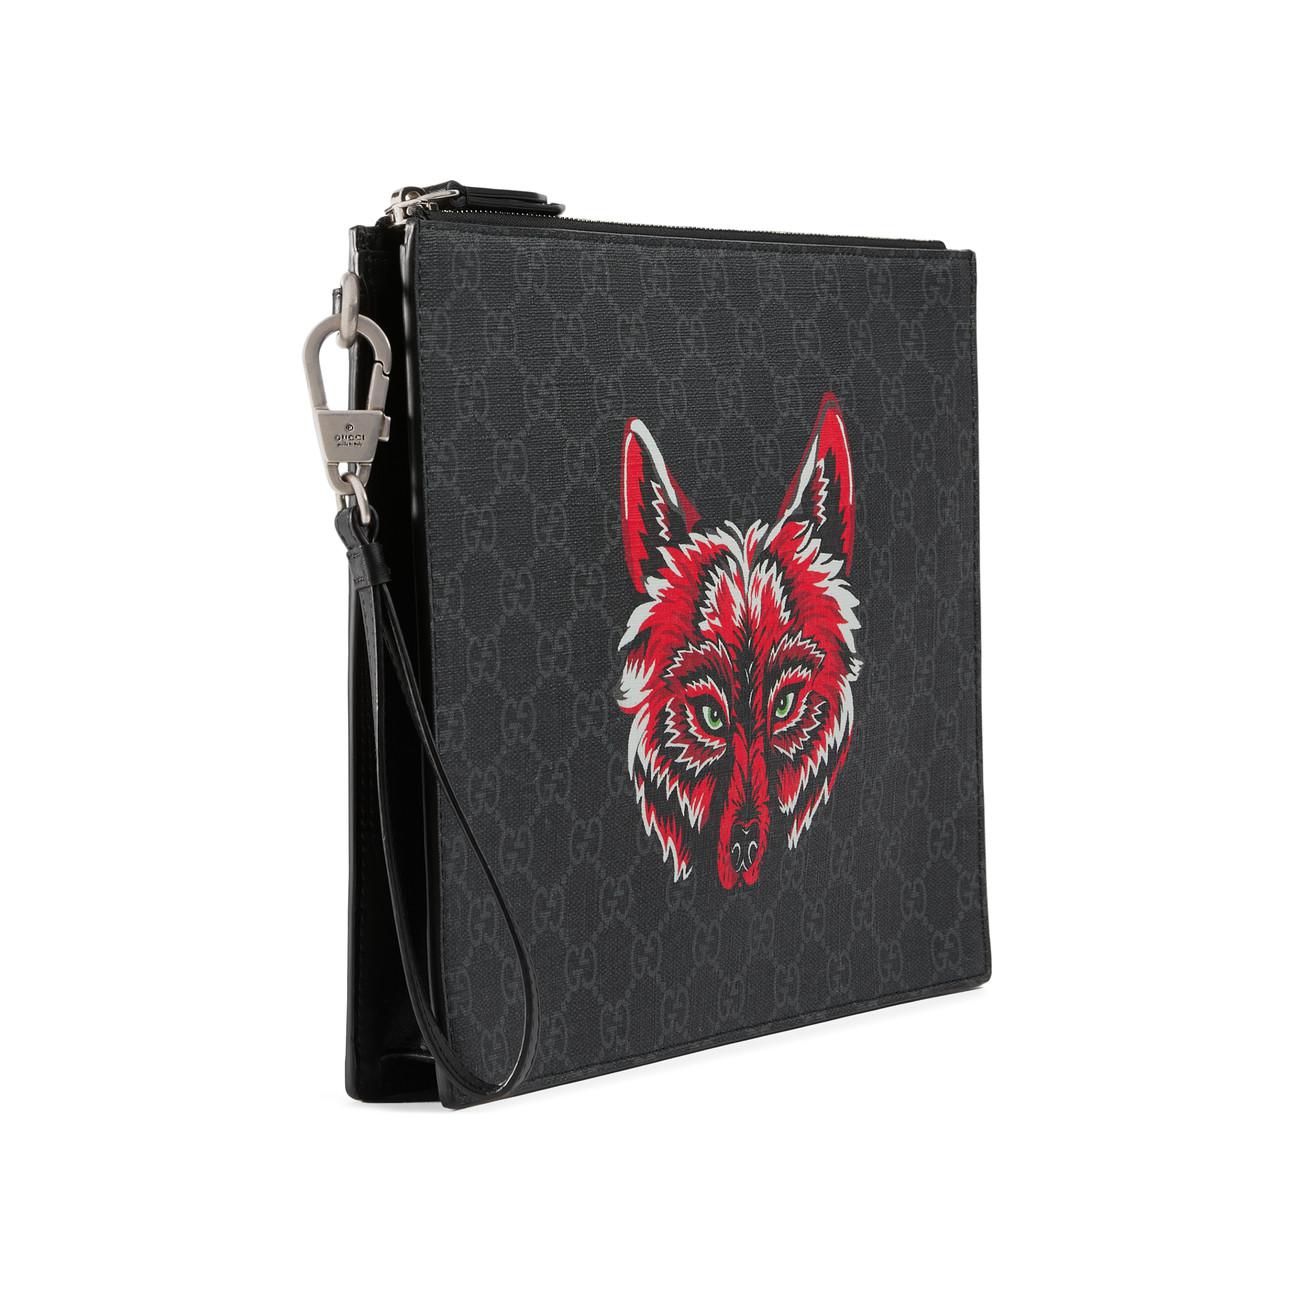 gg supreme pouch with wolf